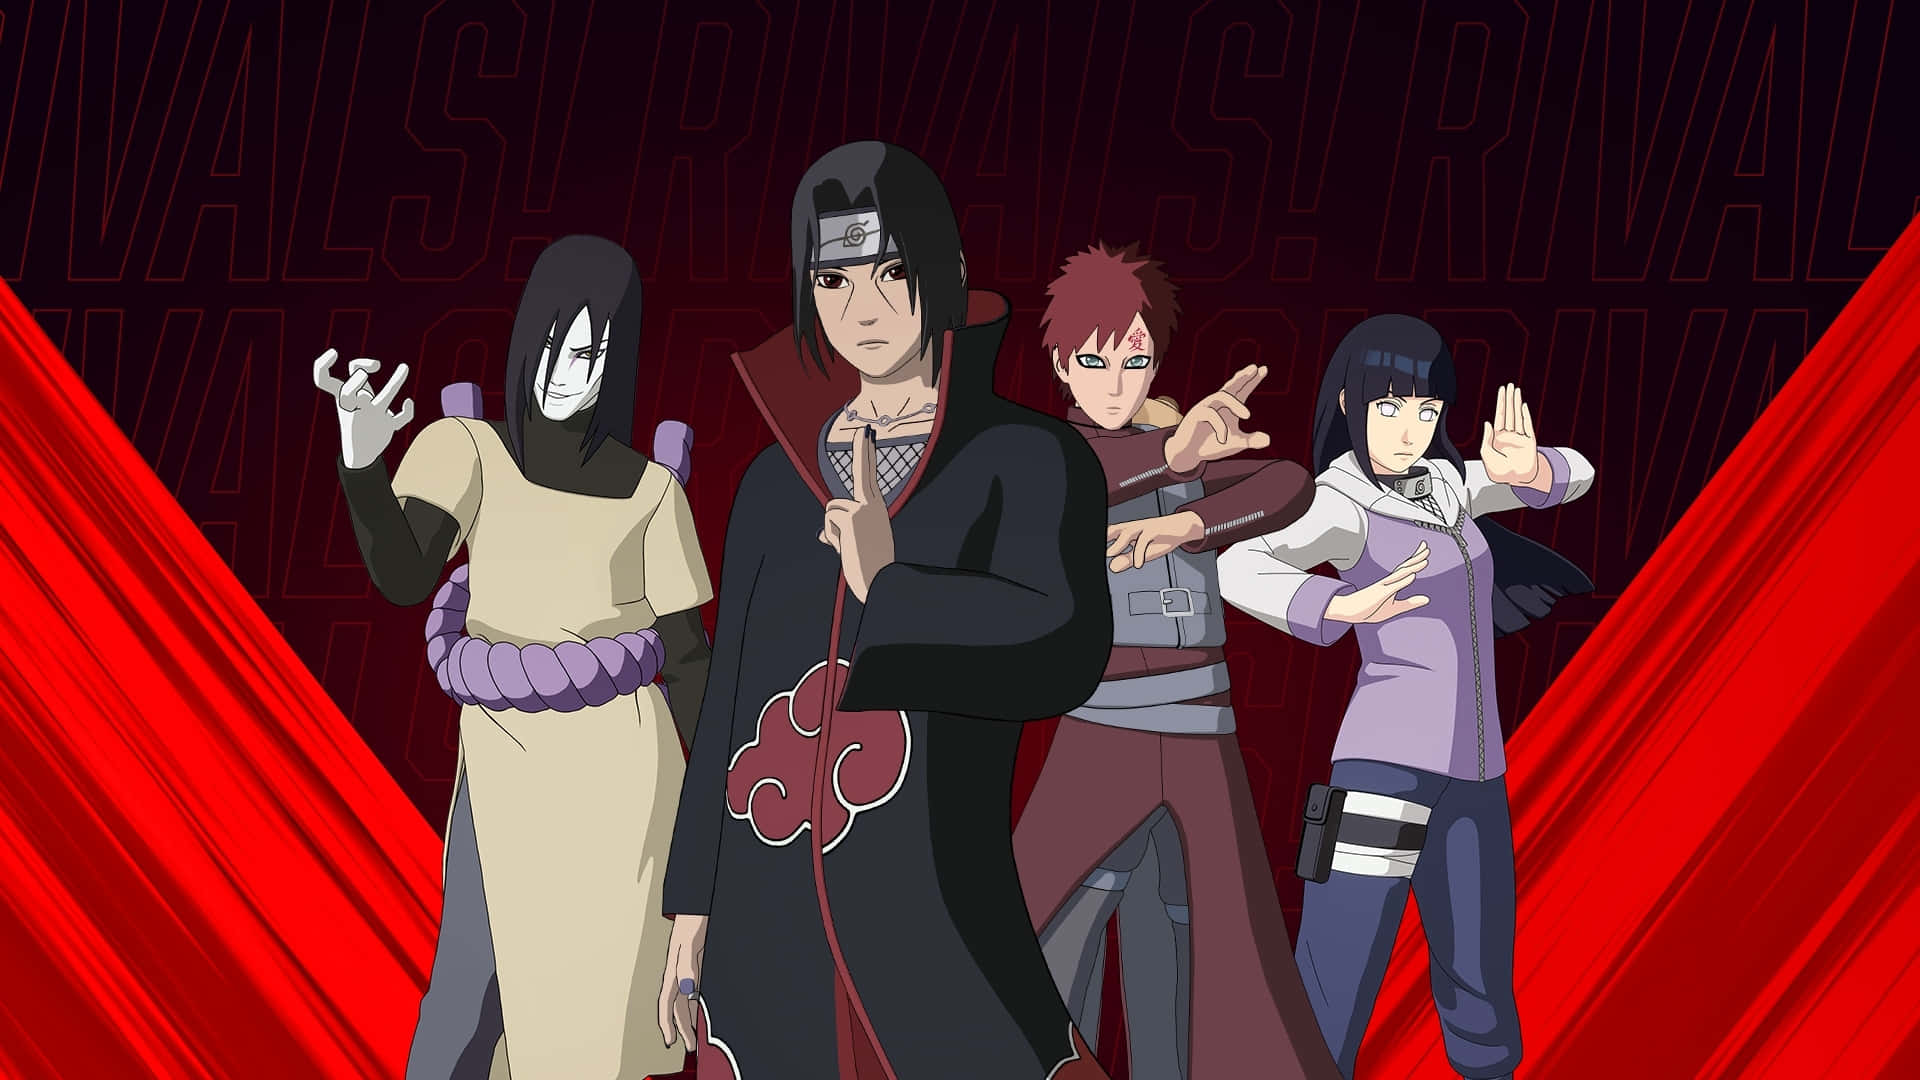 United as Team 7, Naruto and his fellow ninja stand together to protect their village from harm. Wallpaper